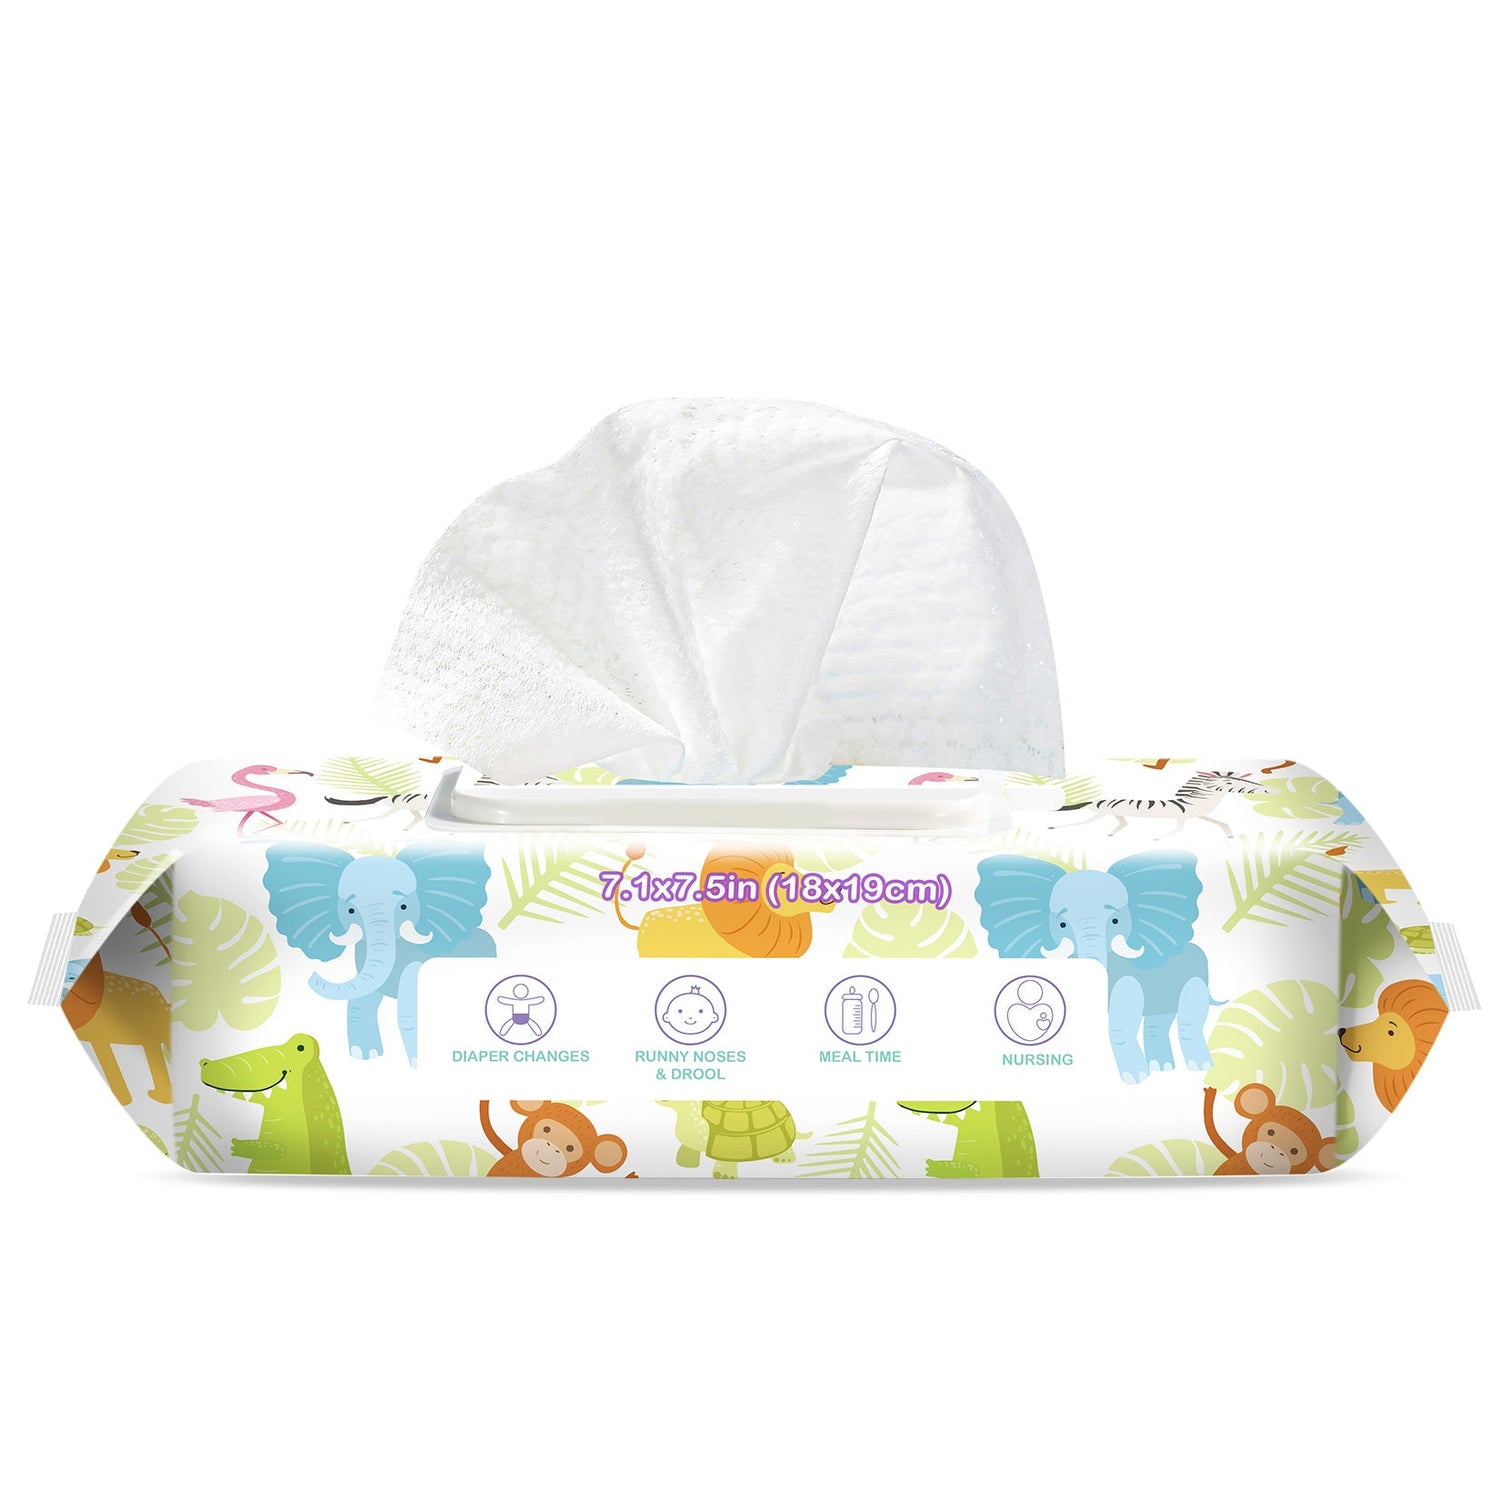 Body &amp; Earth Inc Baby Diaper Wipes Unscented 3 Flip-top Packs